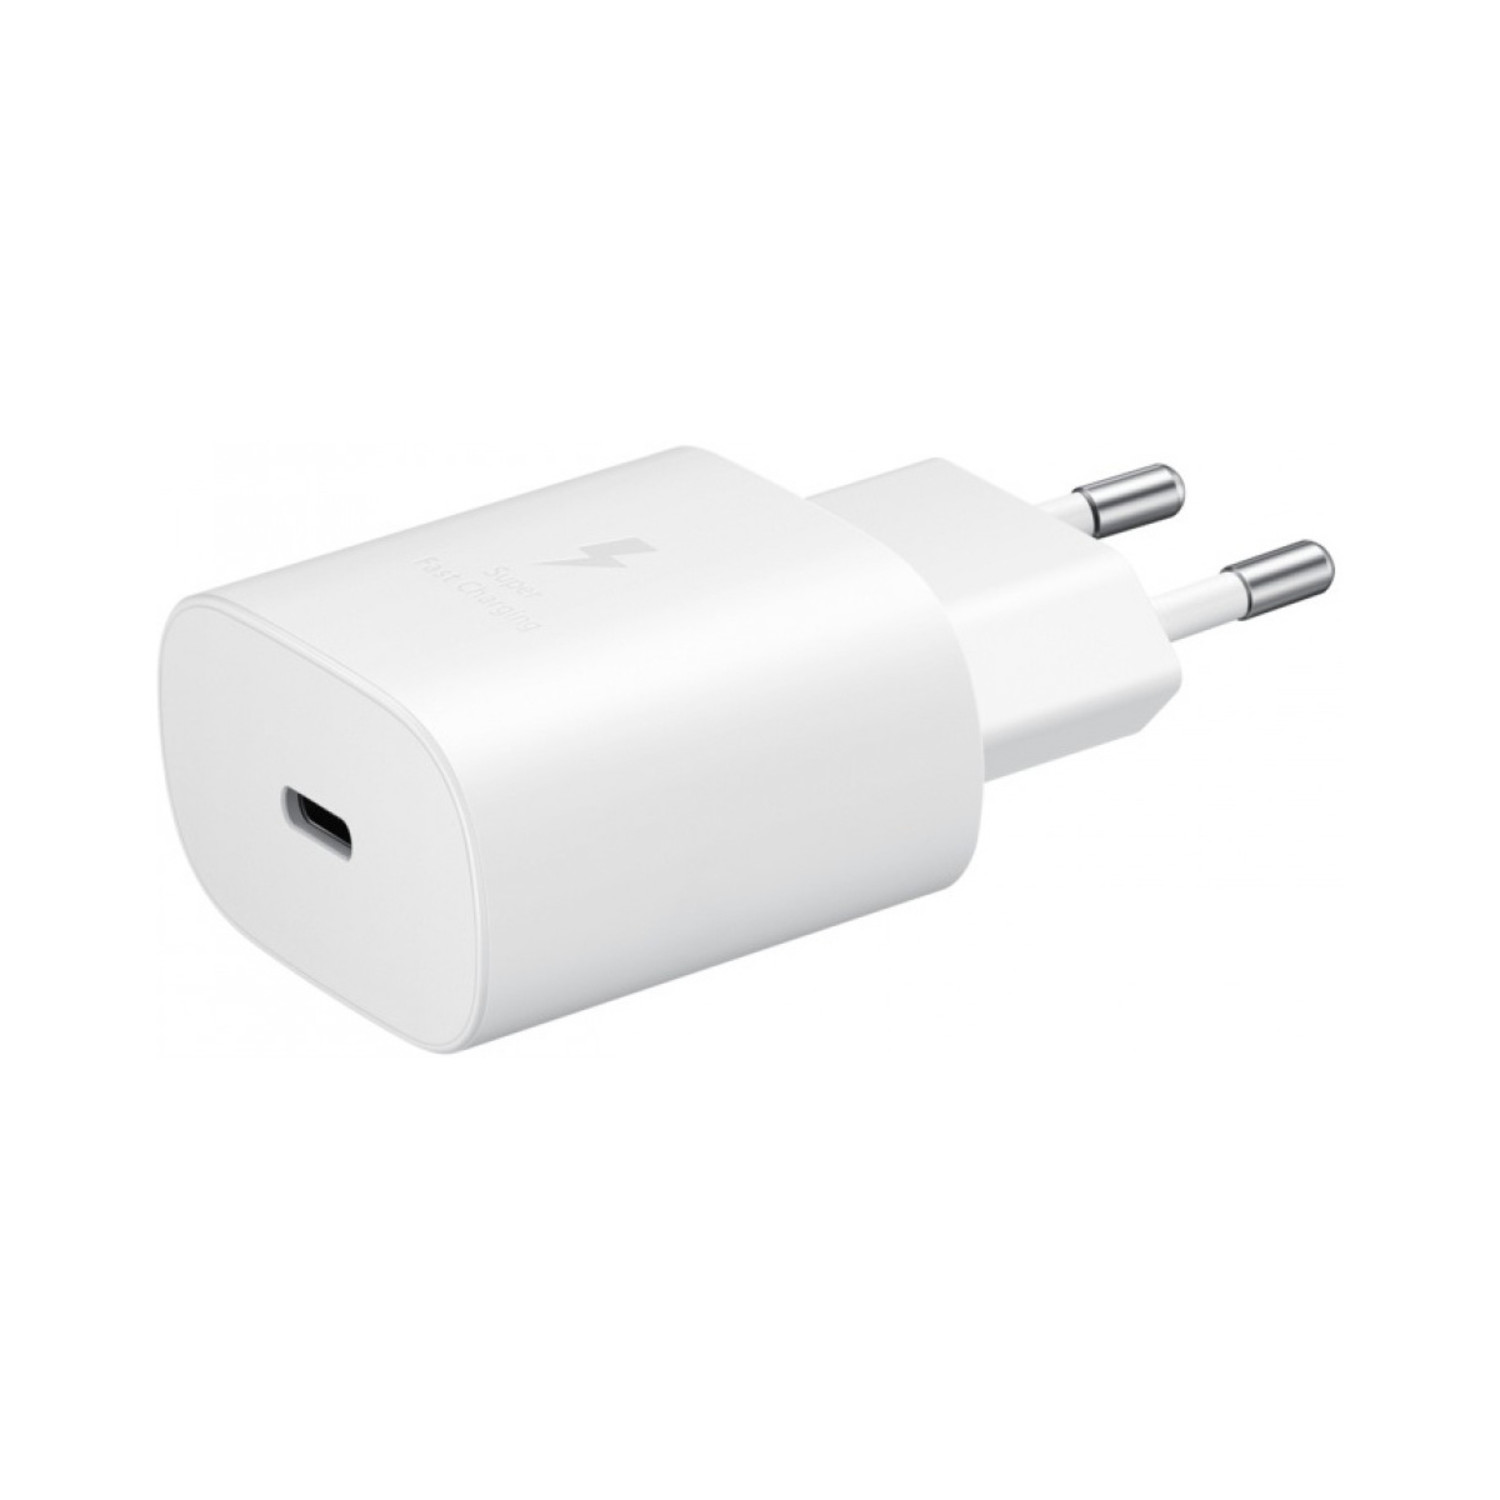 Samsung 25W PD Adapter USB-C - Mac and Much